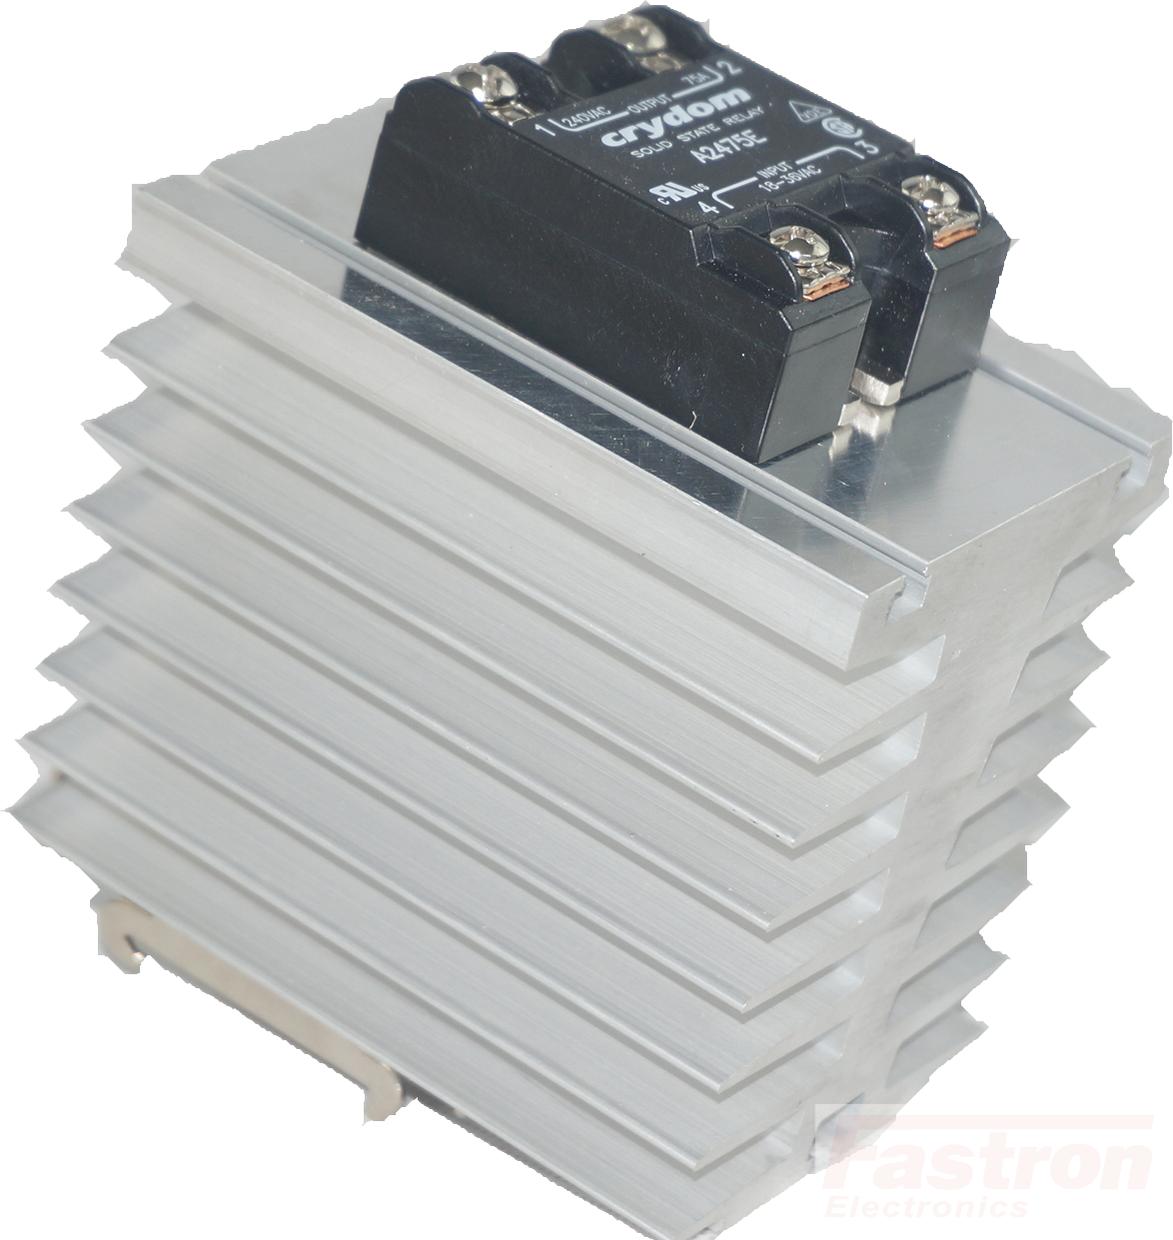 GFIN/100M-DR + CY9008, Din Rail Mount Solid State Relay with Heatsink, 4-32VDC Control Input, 48-660VAC Output, 50 Amps @ 40 Deg C ambient, with IP20 Cover-Solid State Relay Heatsink Assembly AC Load-Fastron Electronics-Fastron Electronics Store